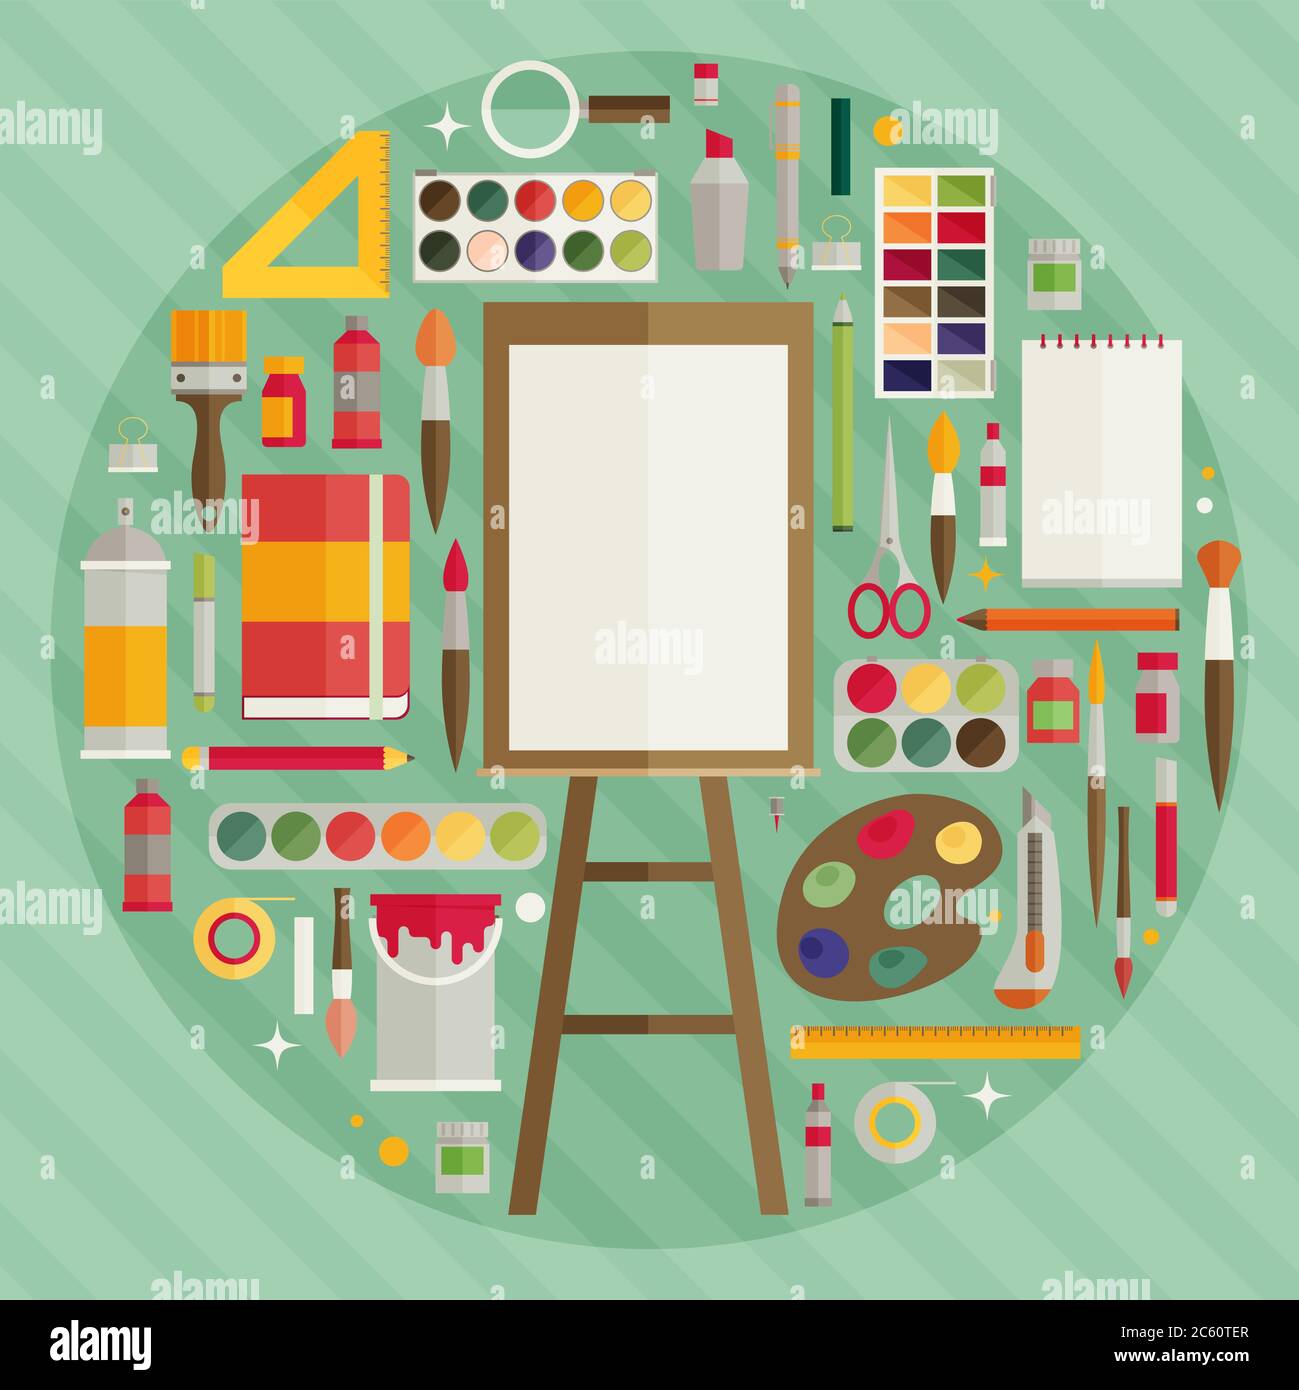 https://c8.alamy.com/comp/2C60TER/flat-design-vector-illustration-icons-set-of-art-supplies-art-instruments-for-painting-drawing-sketching-2C60TER.jpg